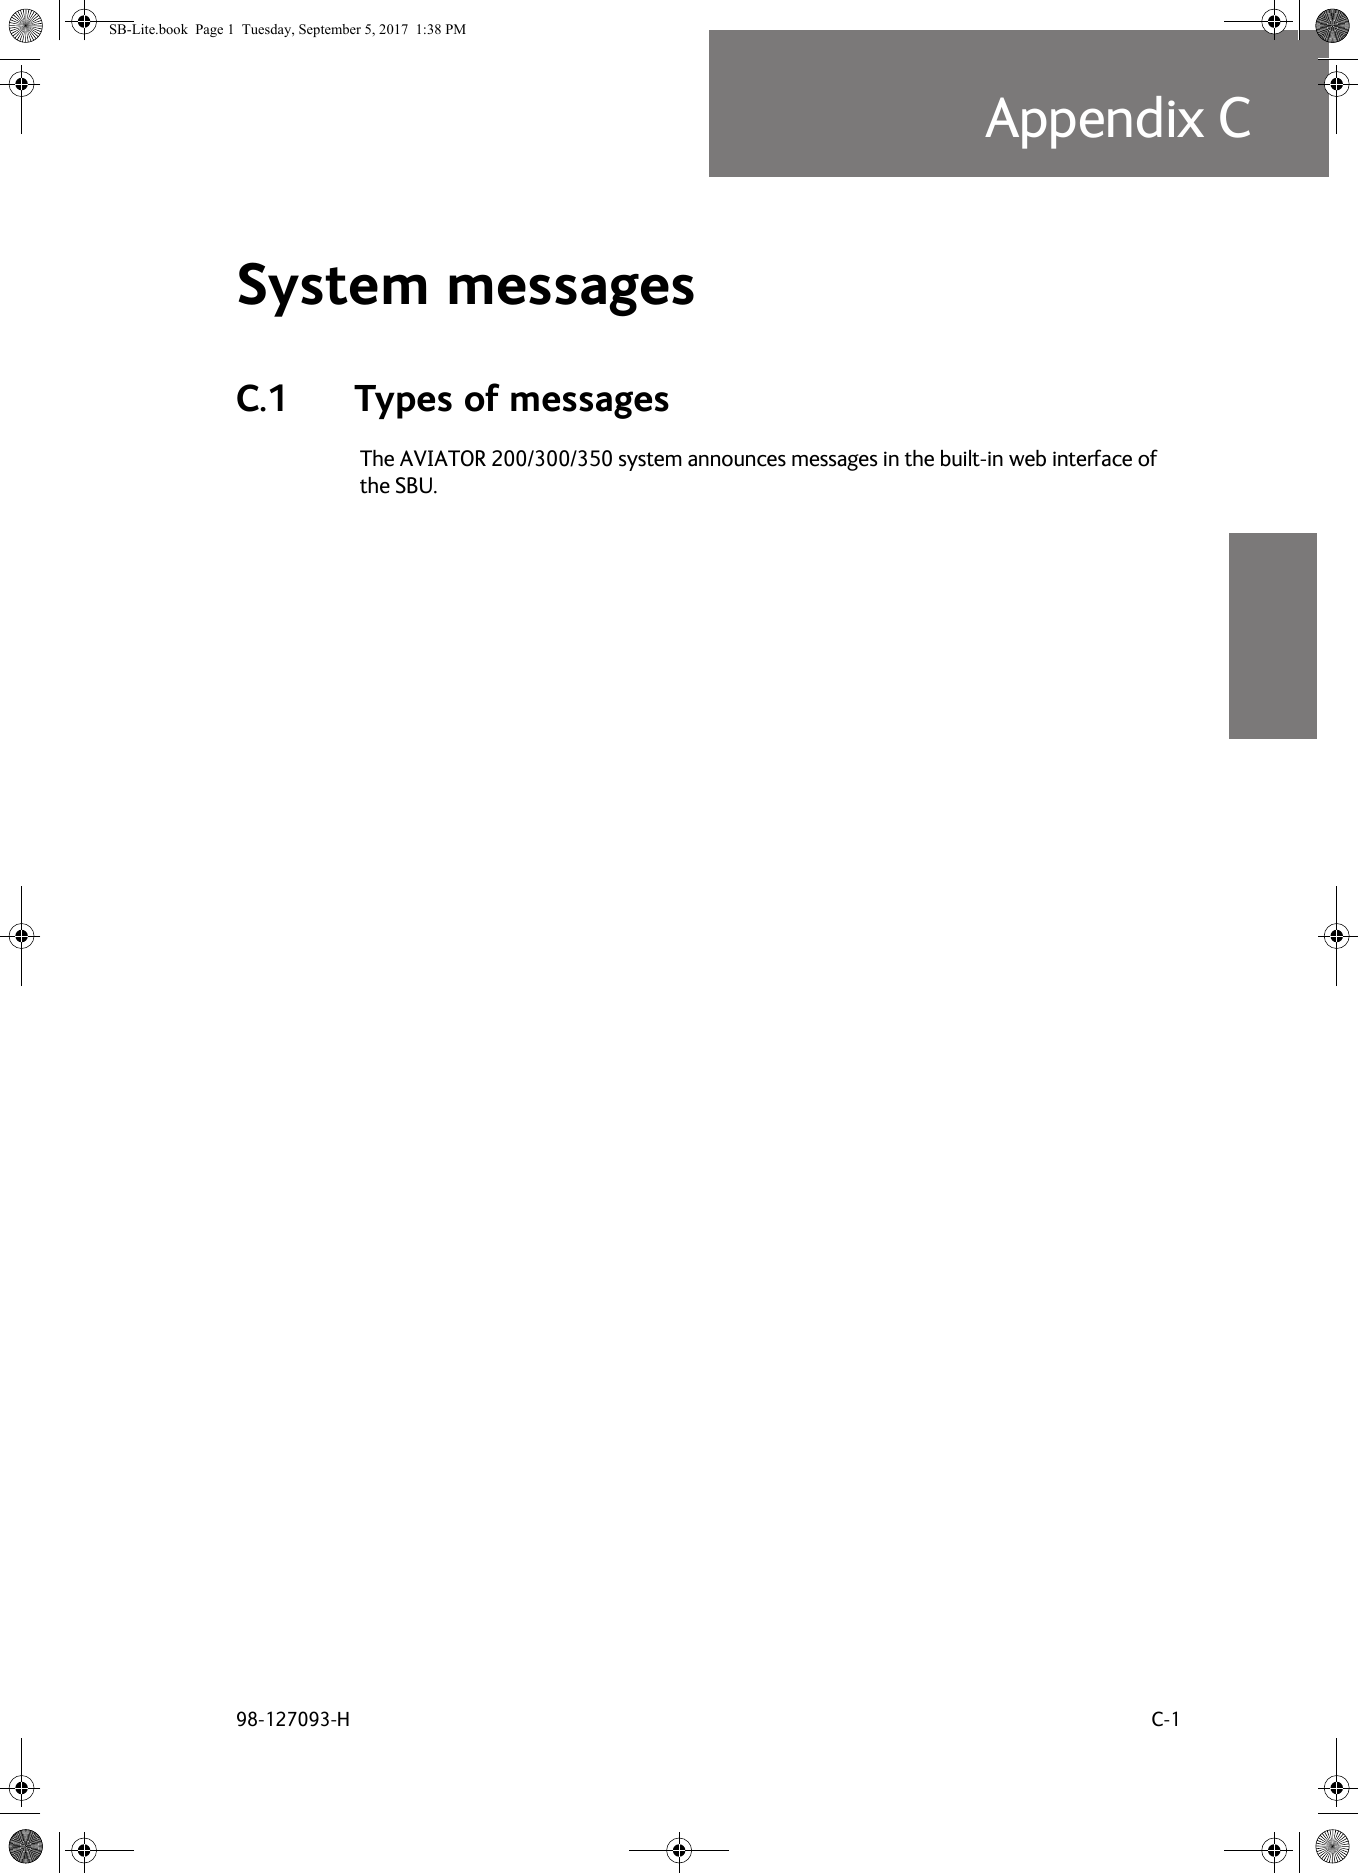 98-127093-H C-1Appendix CCCCCSystem messages CC.1 Types of messagesThe AVIATOR  200/300/350 system announces messages in the built-in web interface of the SBU.SB-Lite.book  Page 1  Tuesday, September 5, 2017  1:38 PM